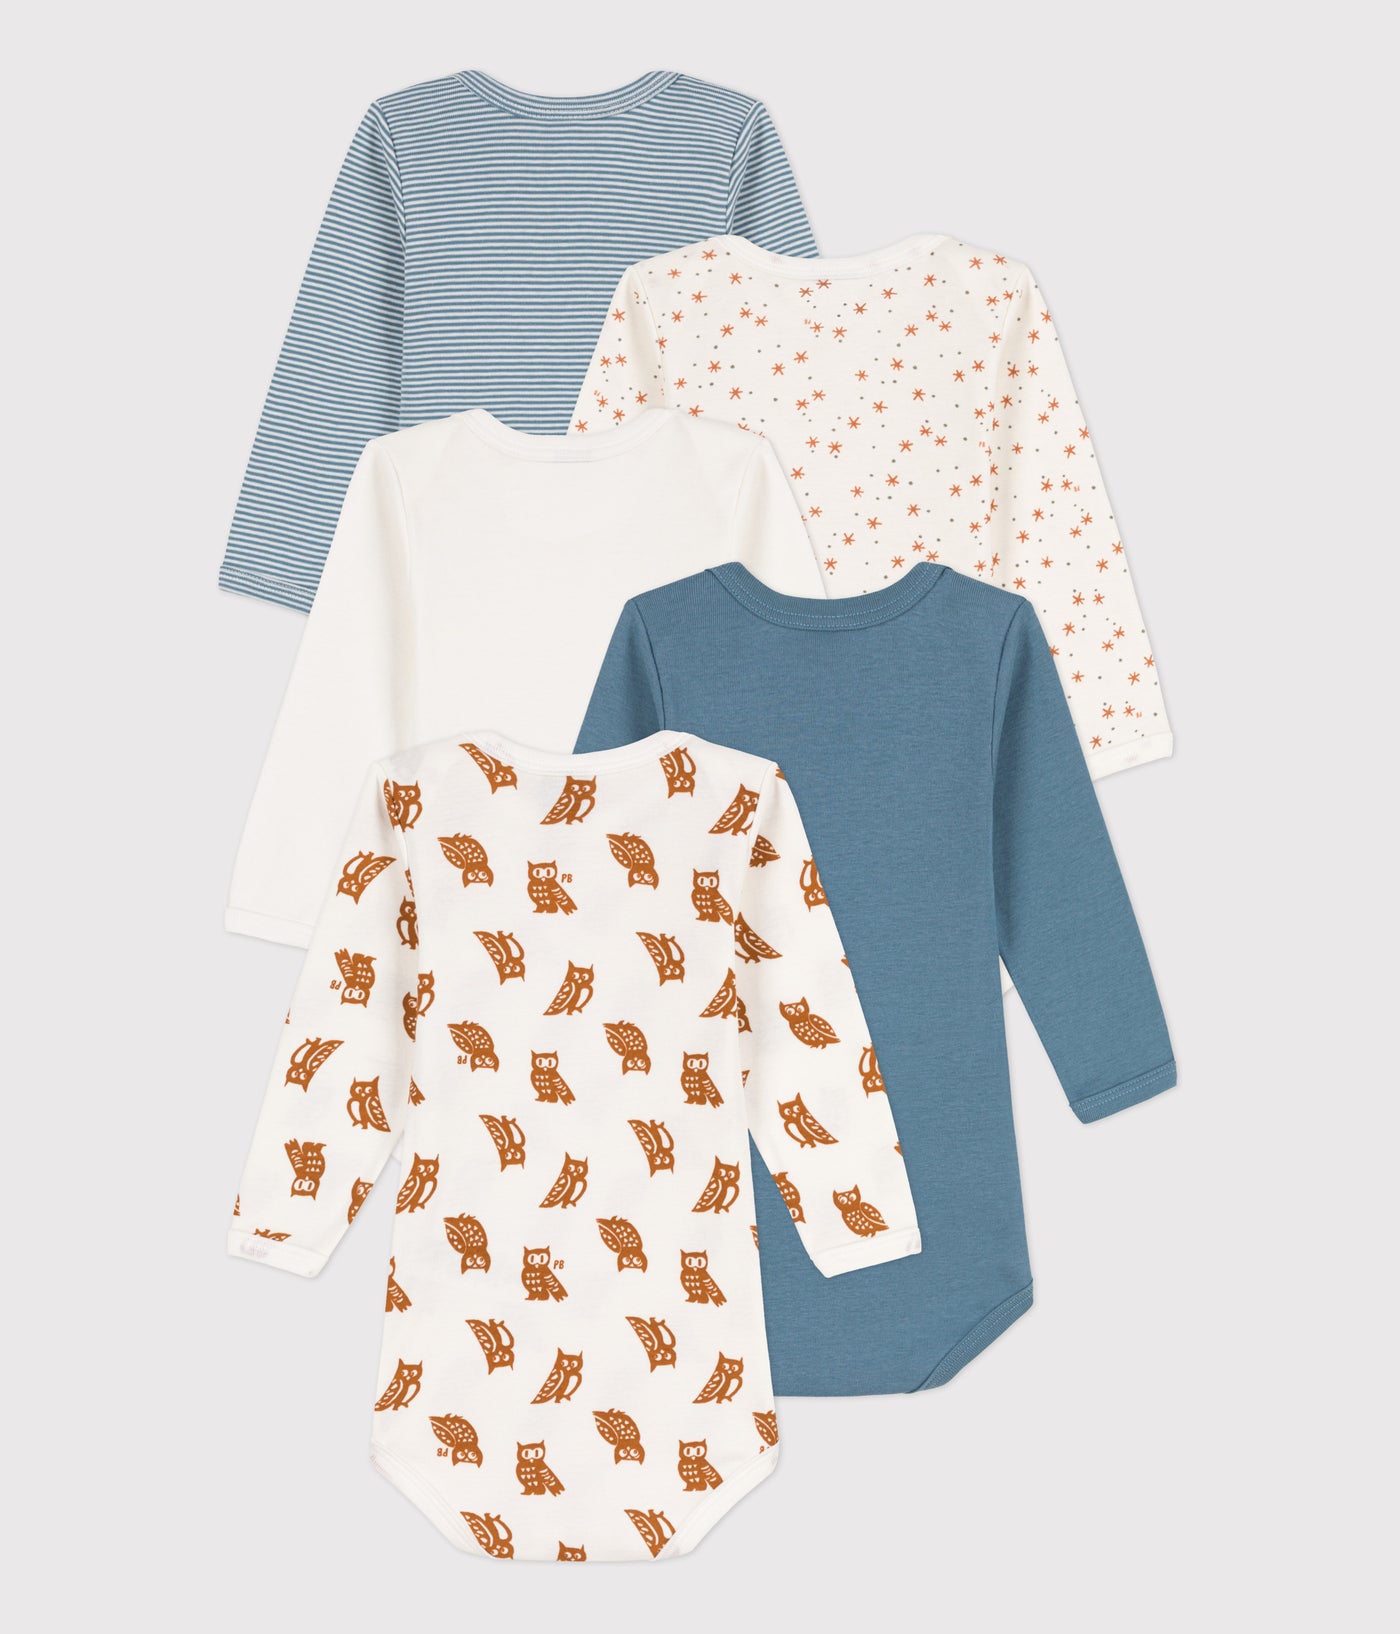 BABIES' OWL PATTERNED LONG-SLEEVED COTTON BODYSUITS - 5-PACK